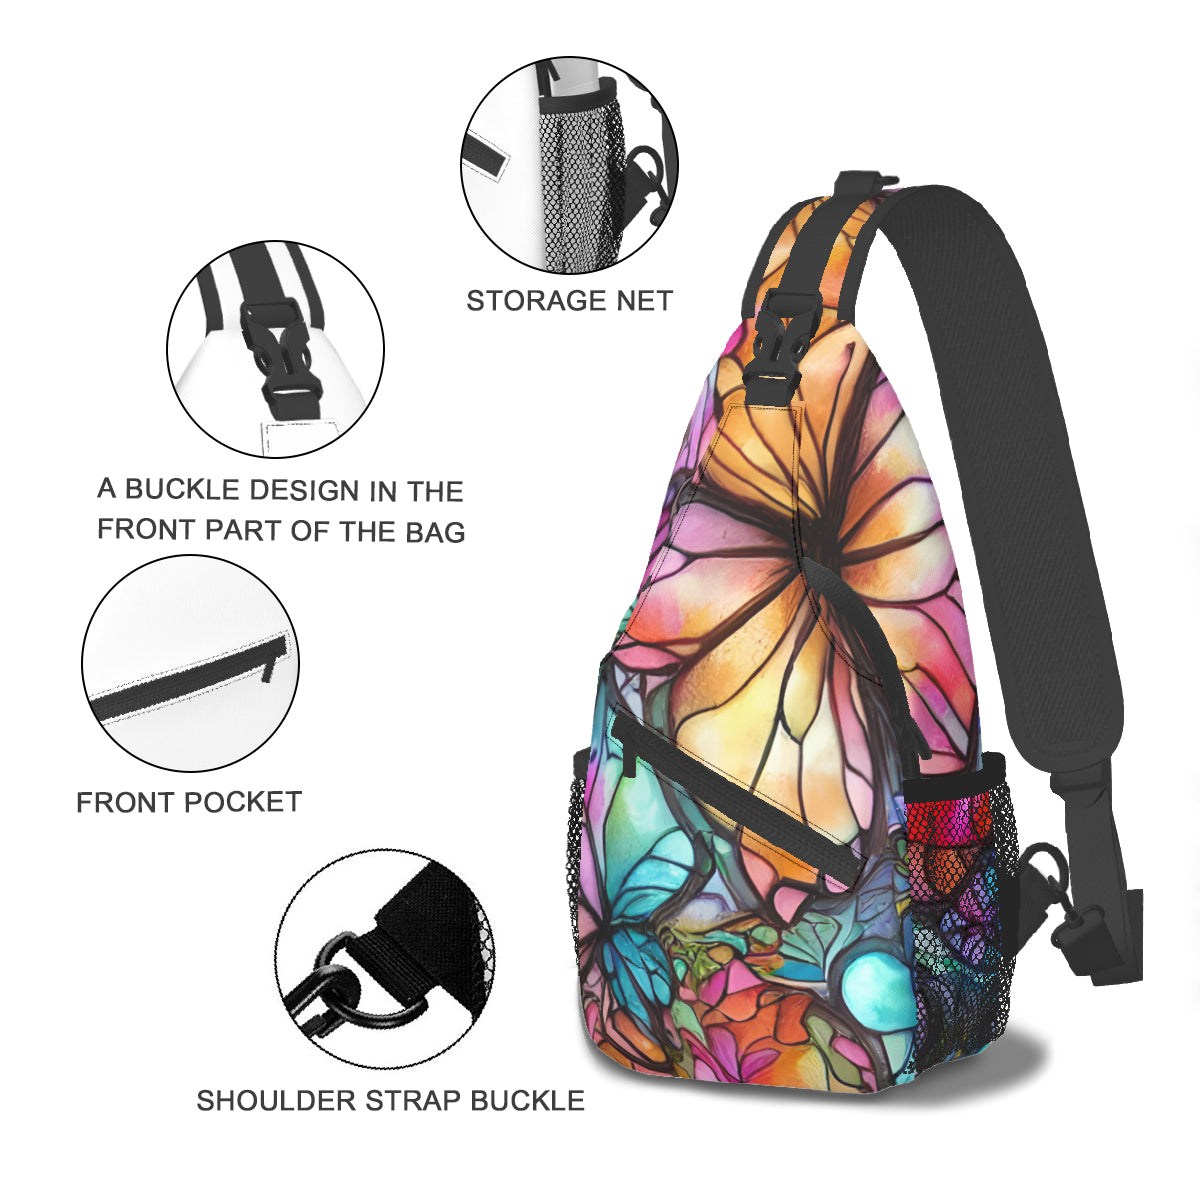 Butterfly Chest Bag decorated with Large Colorful Bag - Custom Sewn